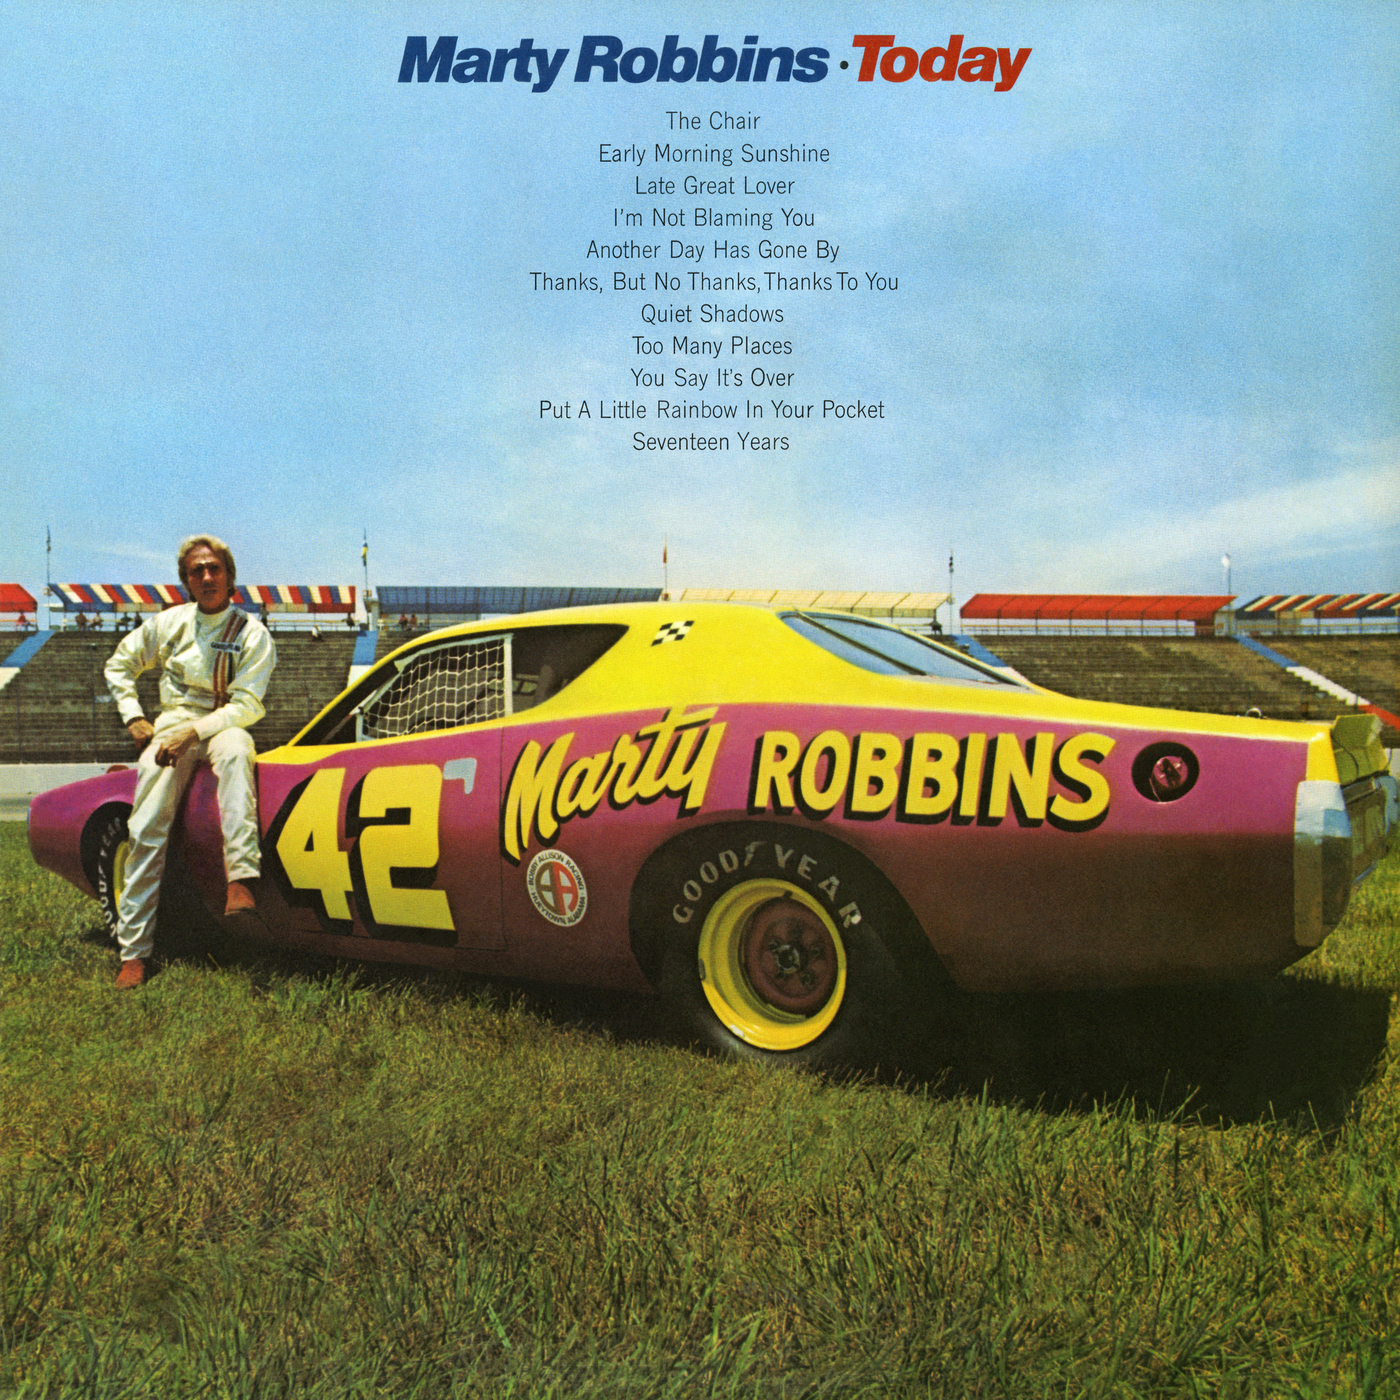 Another Day Has Gone By/Marty Robbins